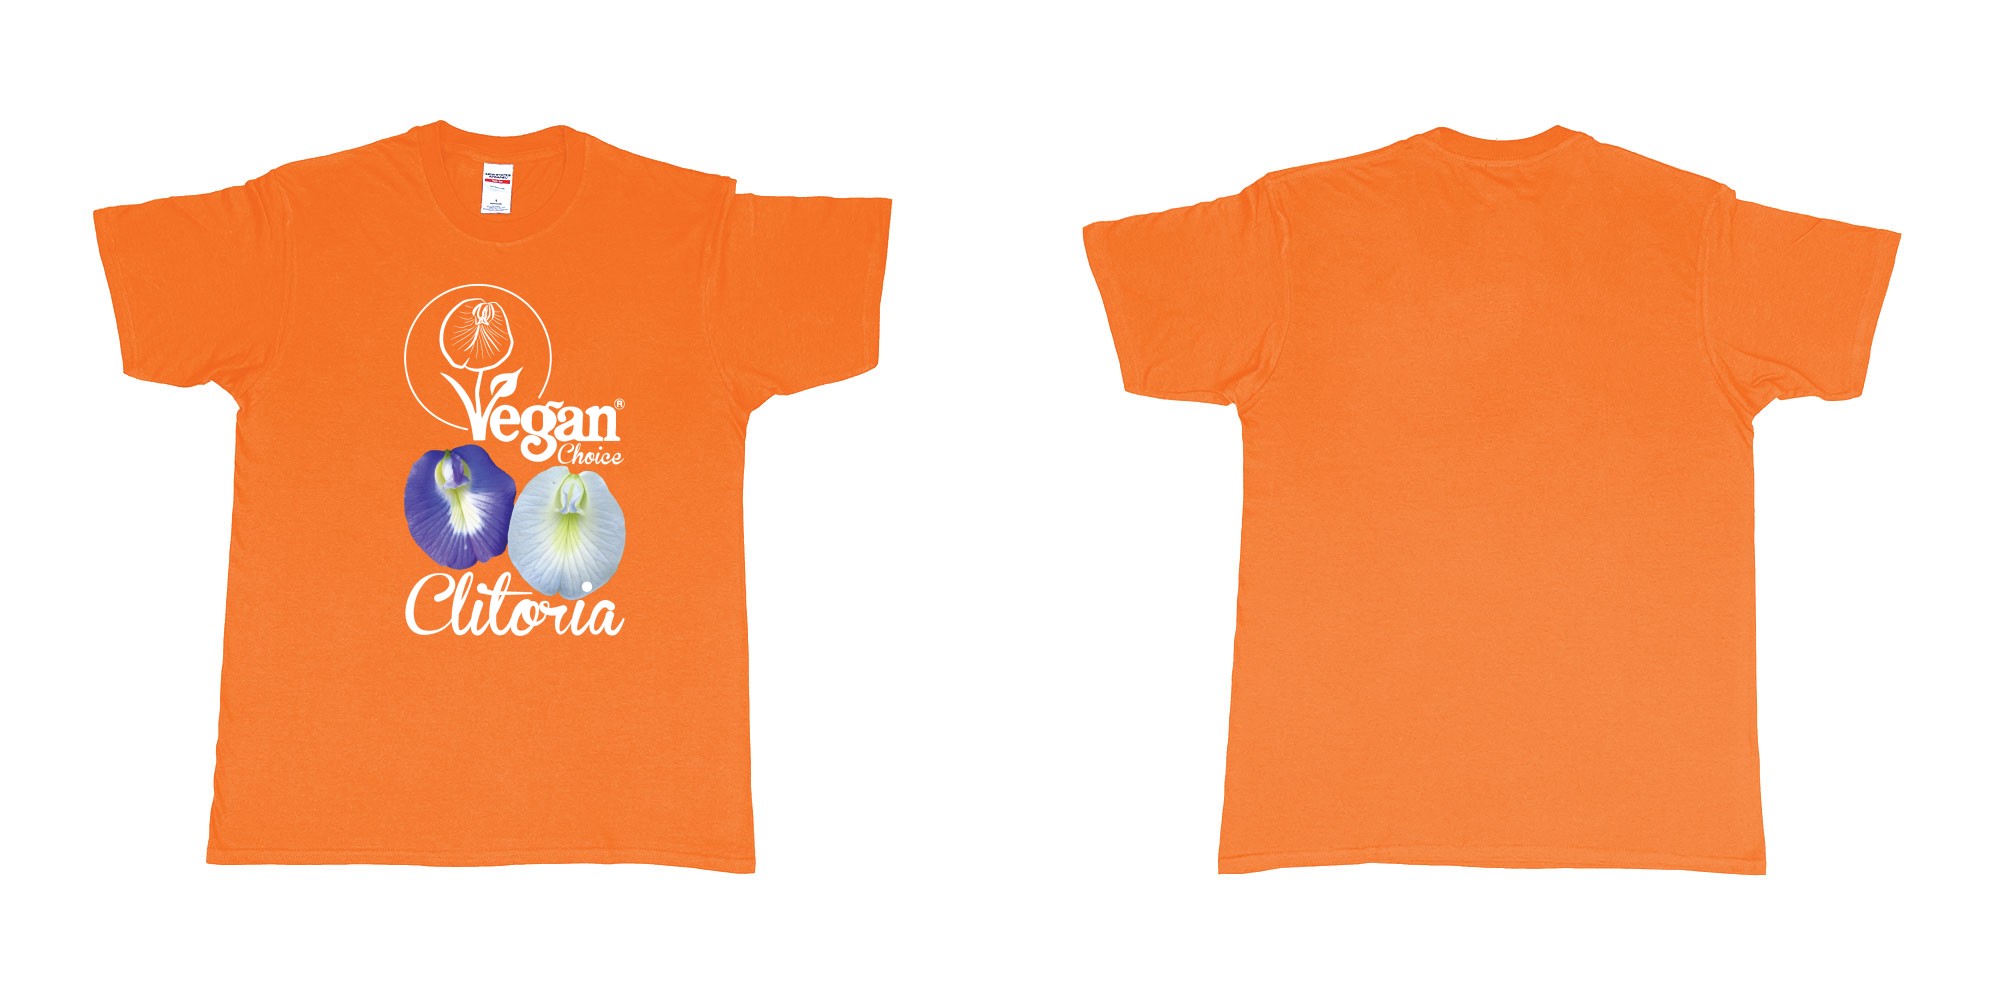 Custom tshirt design vegan choice clitoria flowers in fabric color orange choice your own text made in Bali by The Pirate Way